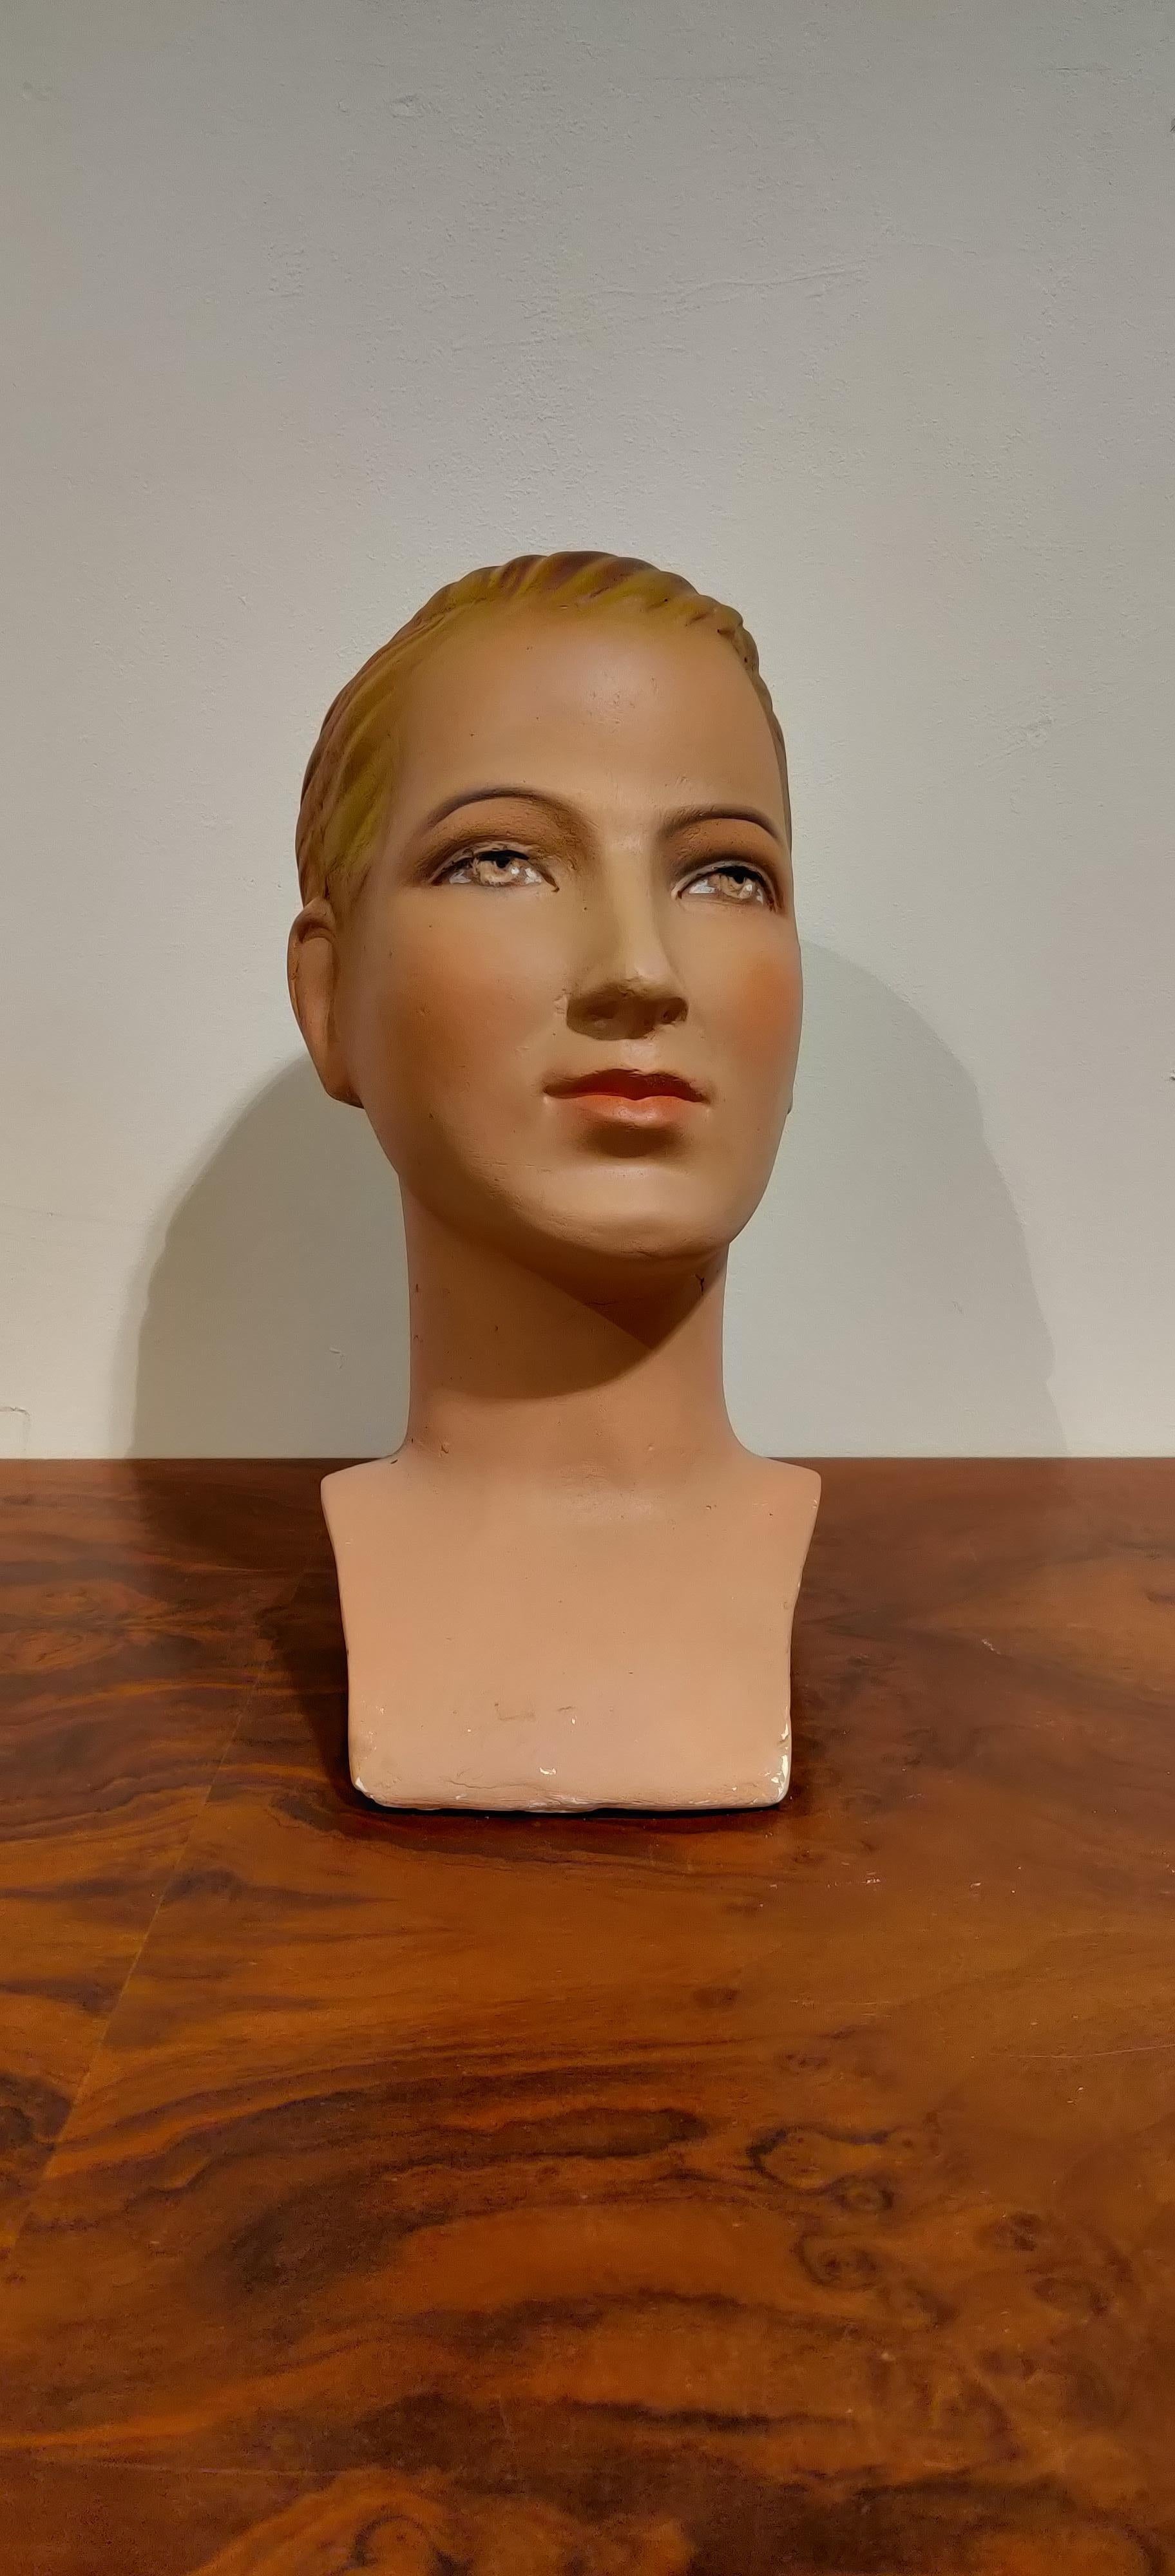 Beautiful male mannequin head made from plaster. 

It has some minor user traces.

Comes from a lot acquired from a clothes shop that stopped activities.

Great decorative item to display glasses, hats.

France, 1960s

Measures: Height